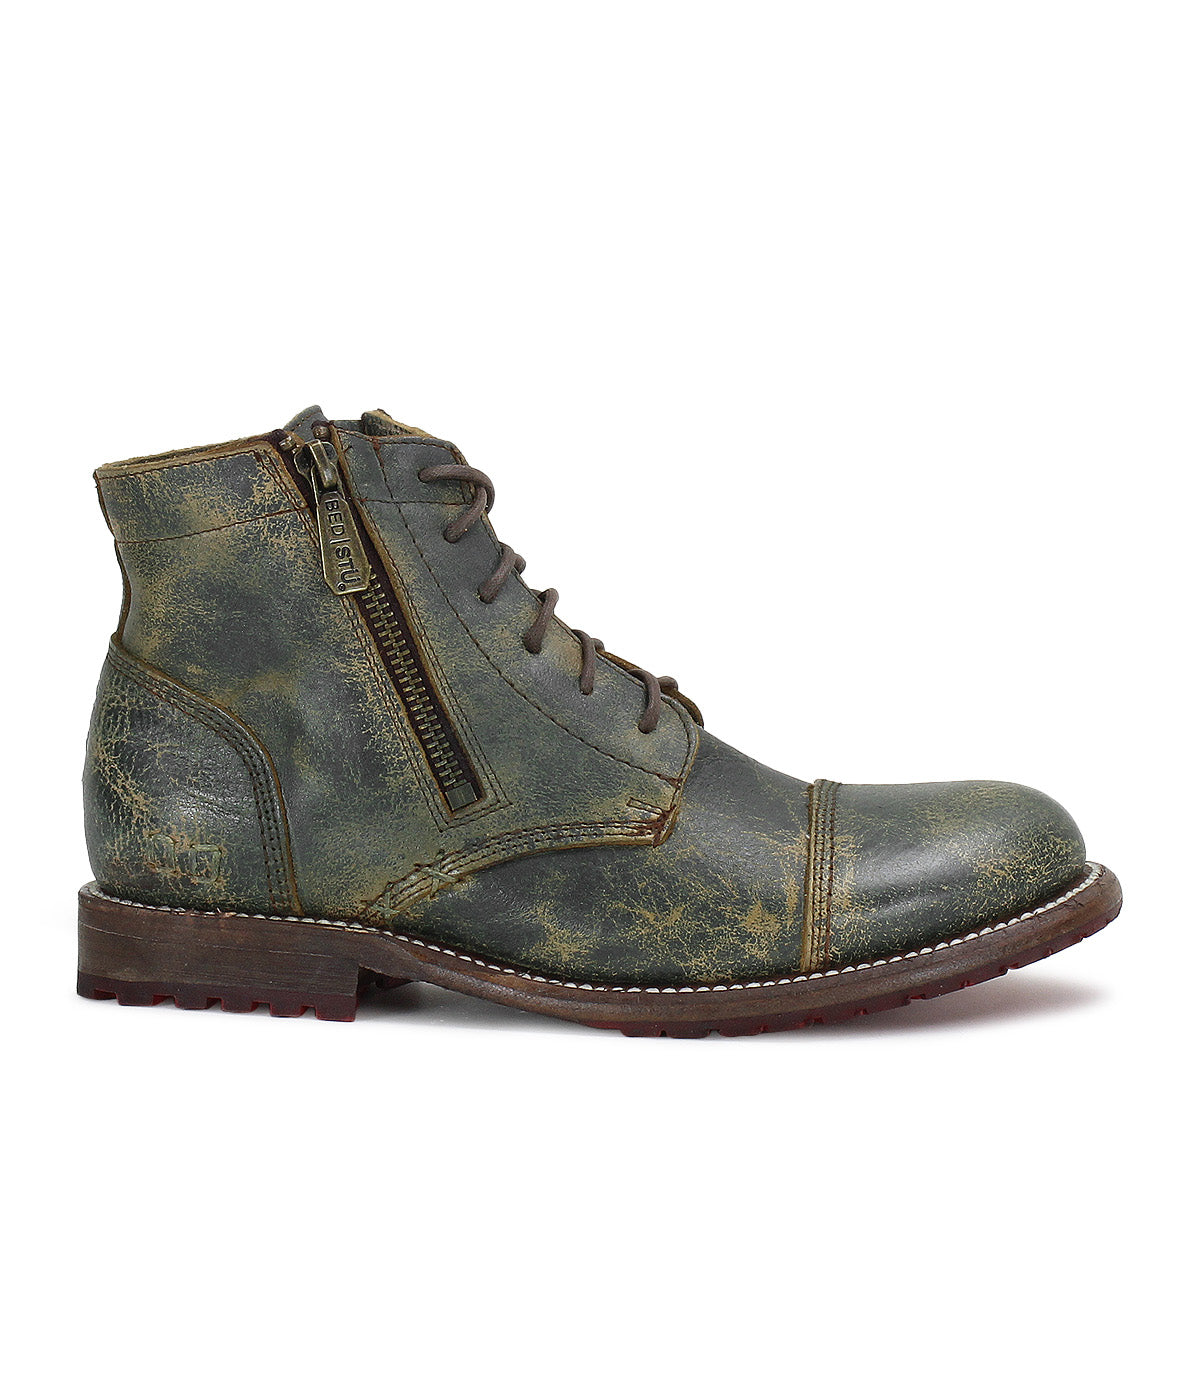 A women's Bonnie II boot by Bed Stu, featuring teal leather and a zipper on the side.